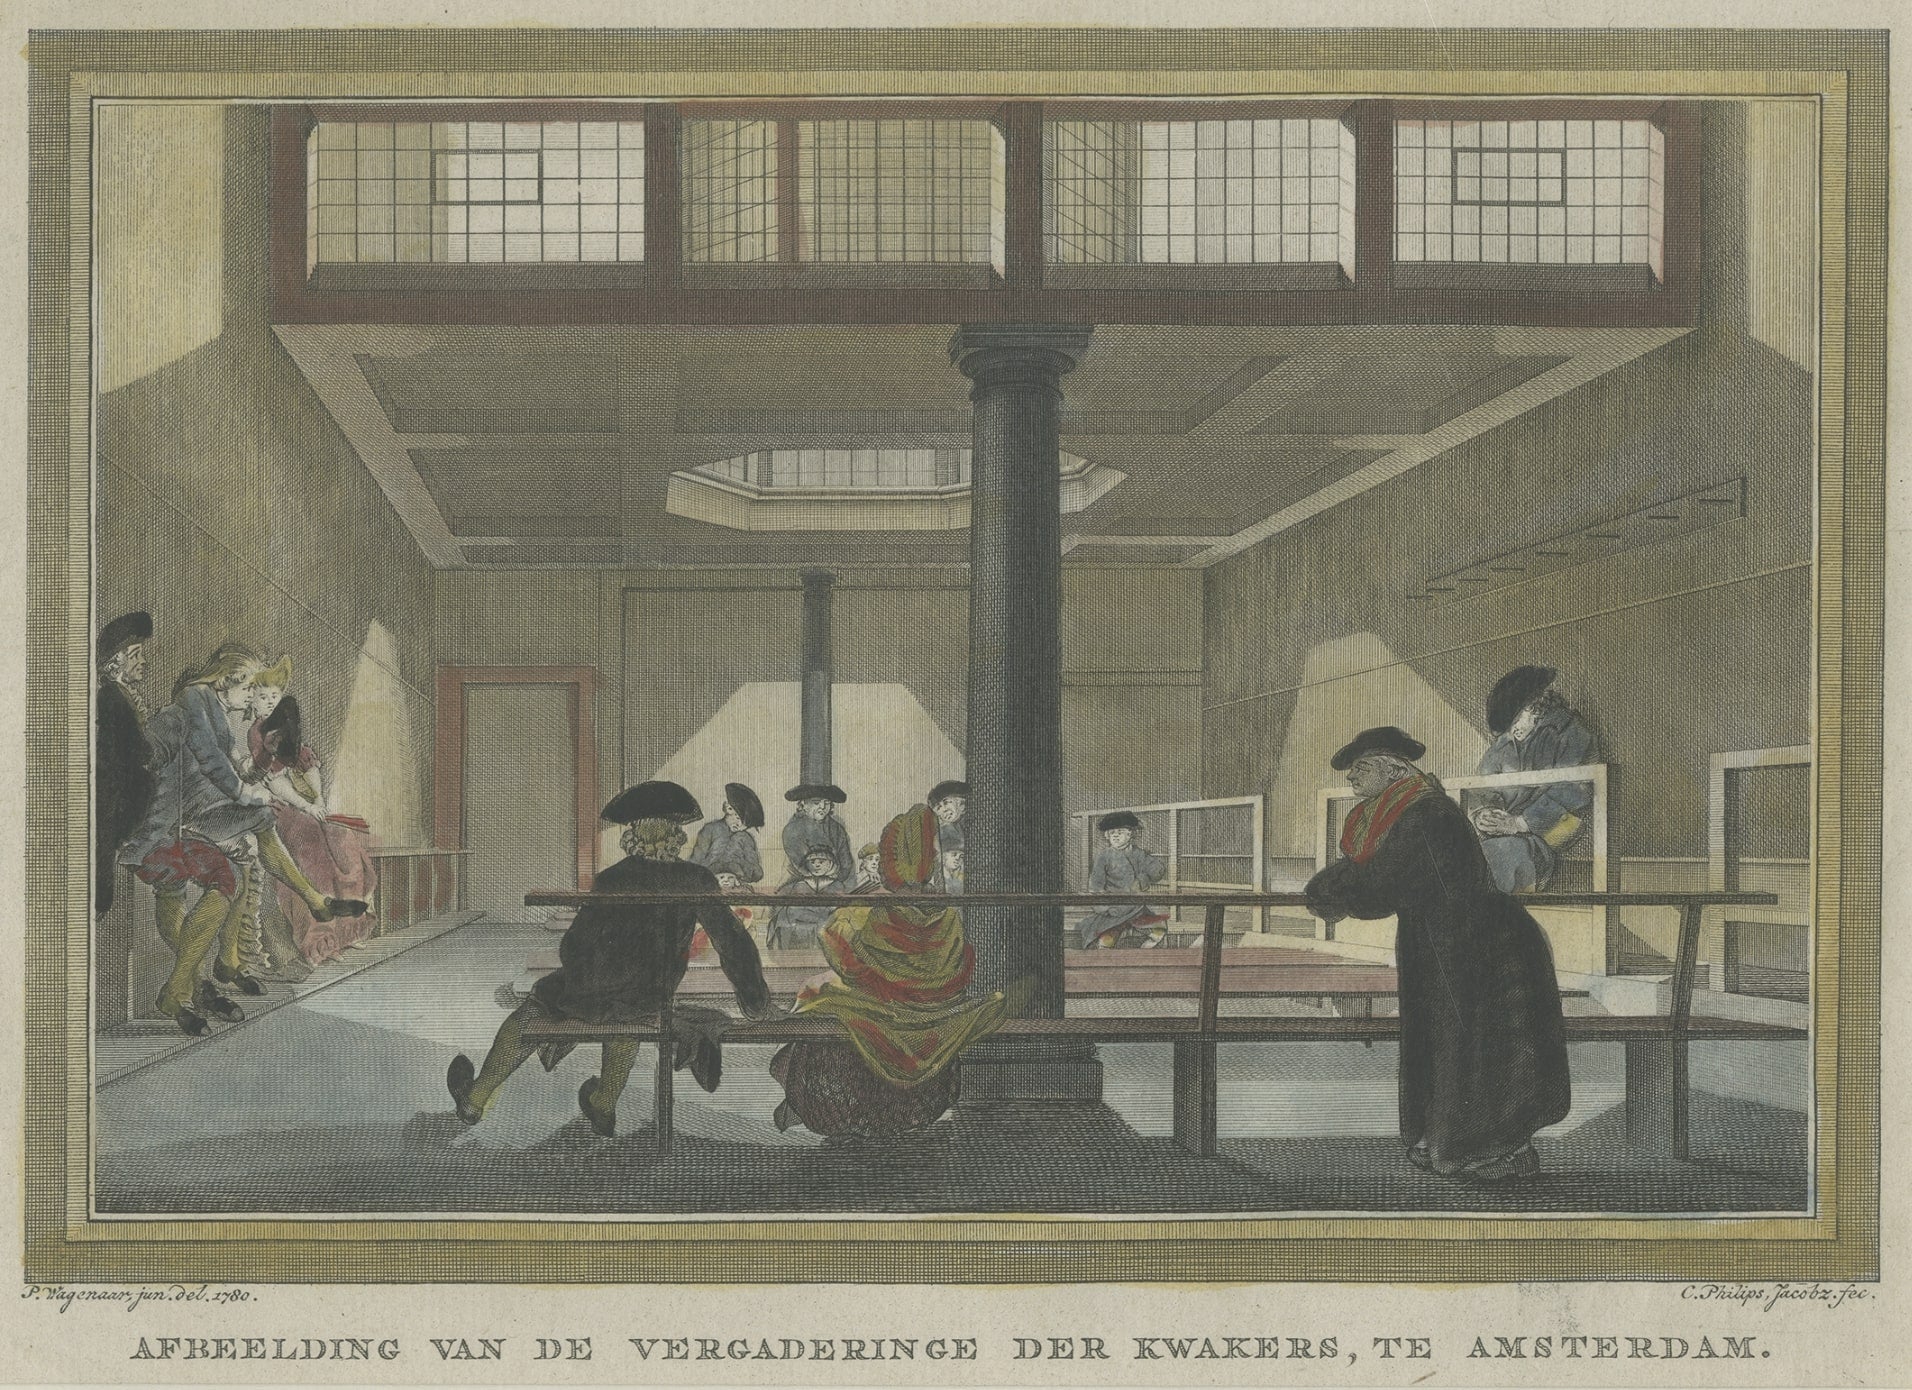 Description: Antique print titled 'Afbeelding van de Vergaderinge der Kwakers, te Amsterdam'. 

This print shows a group of Quakers meeting in a church in Amsterdam, the Netherlands. Published circa 1790.

Artists and Engravers: Engraved by